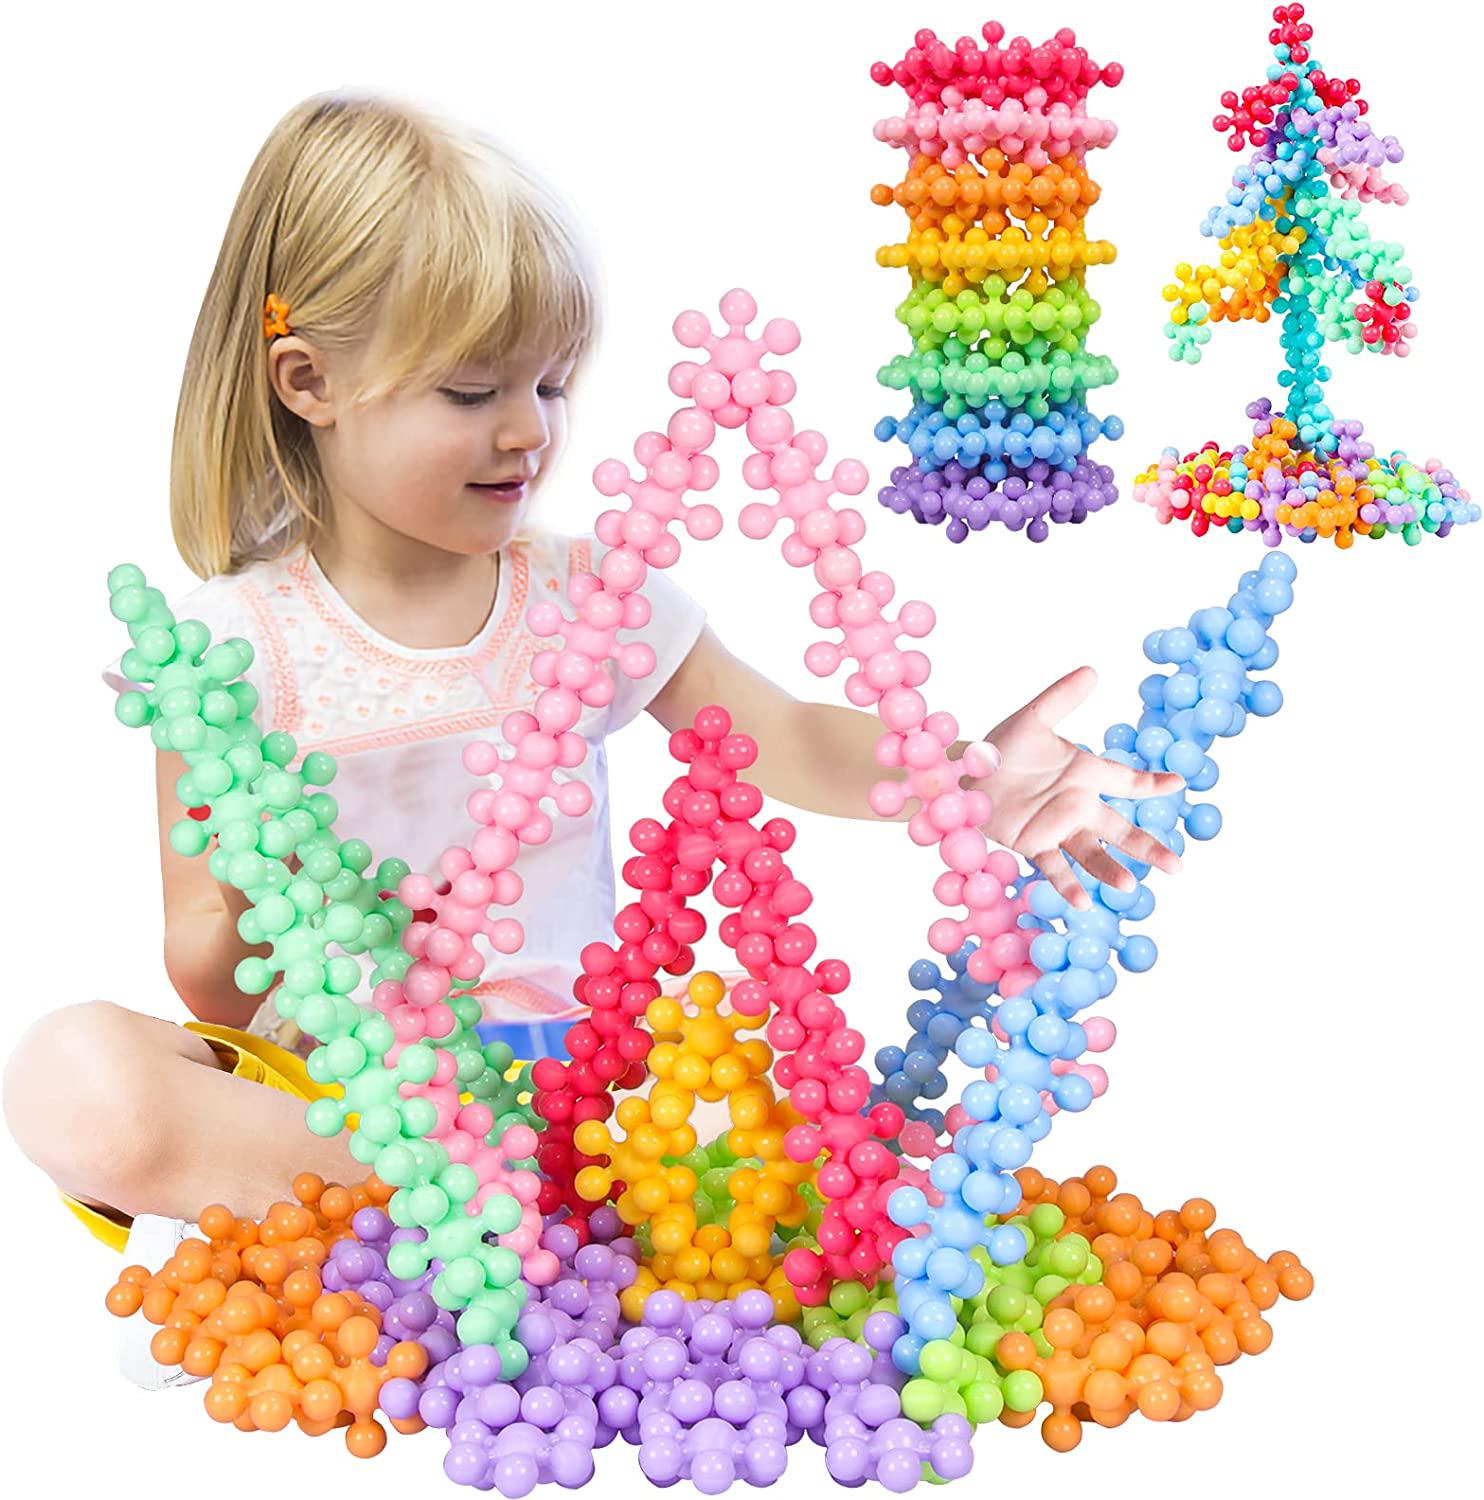 Learn2M, Learn2M 240 Pieces Building Blocks Interlocking Solid Plastic, Kids STEM Toys Educational Upgrade Building Toys Discs Sets for Preschool Boys and Girls Aged 3+, Creativity Kids Games with Storage Box